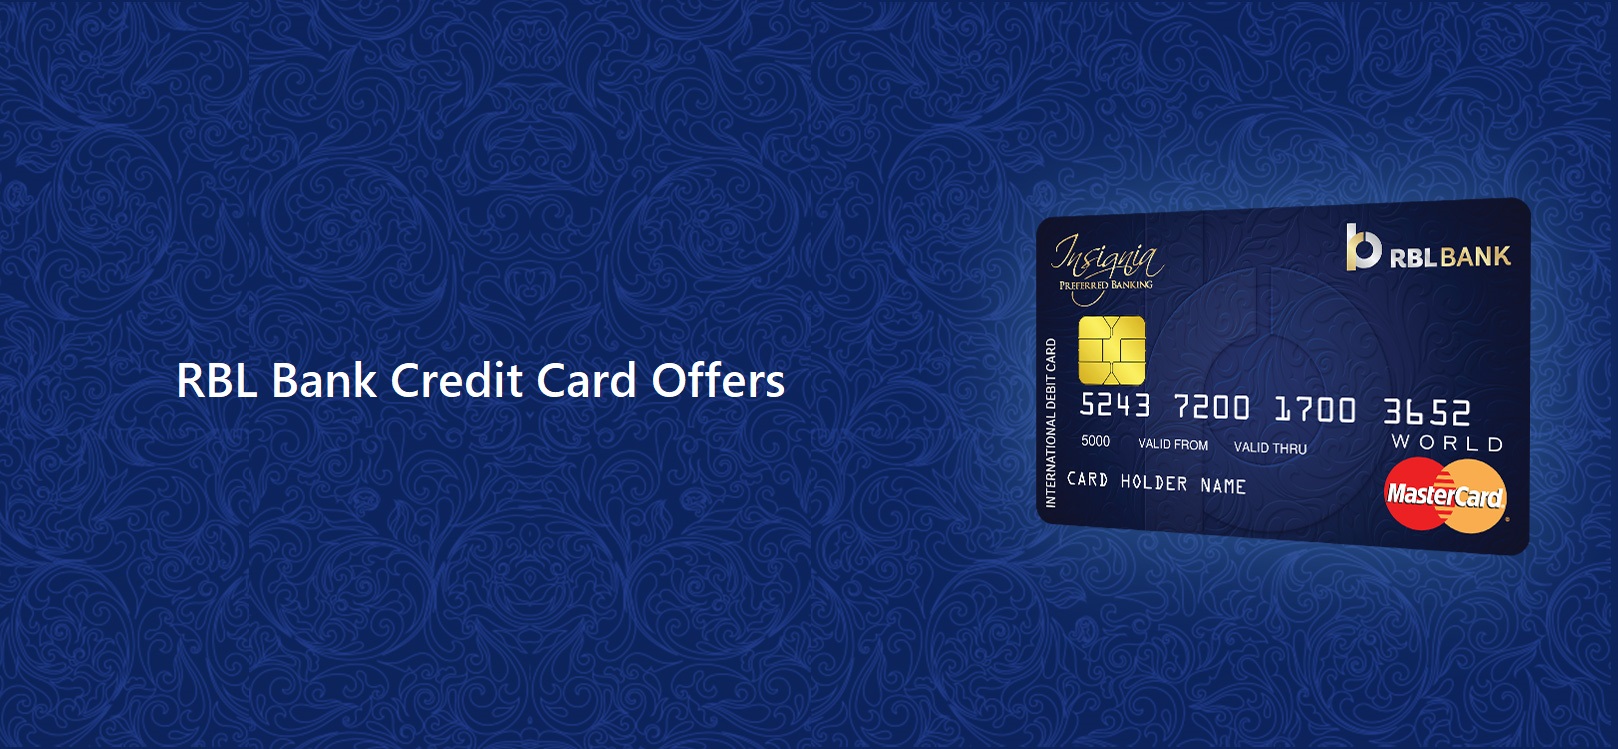 RBL Bank Credit Card Offers